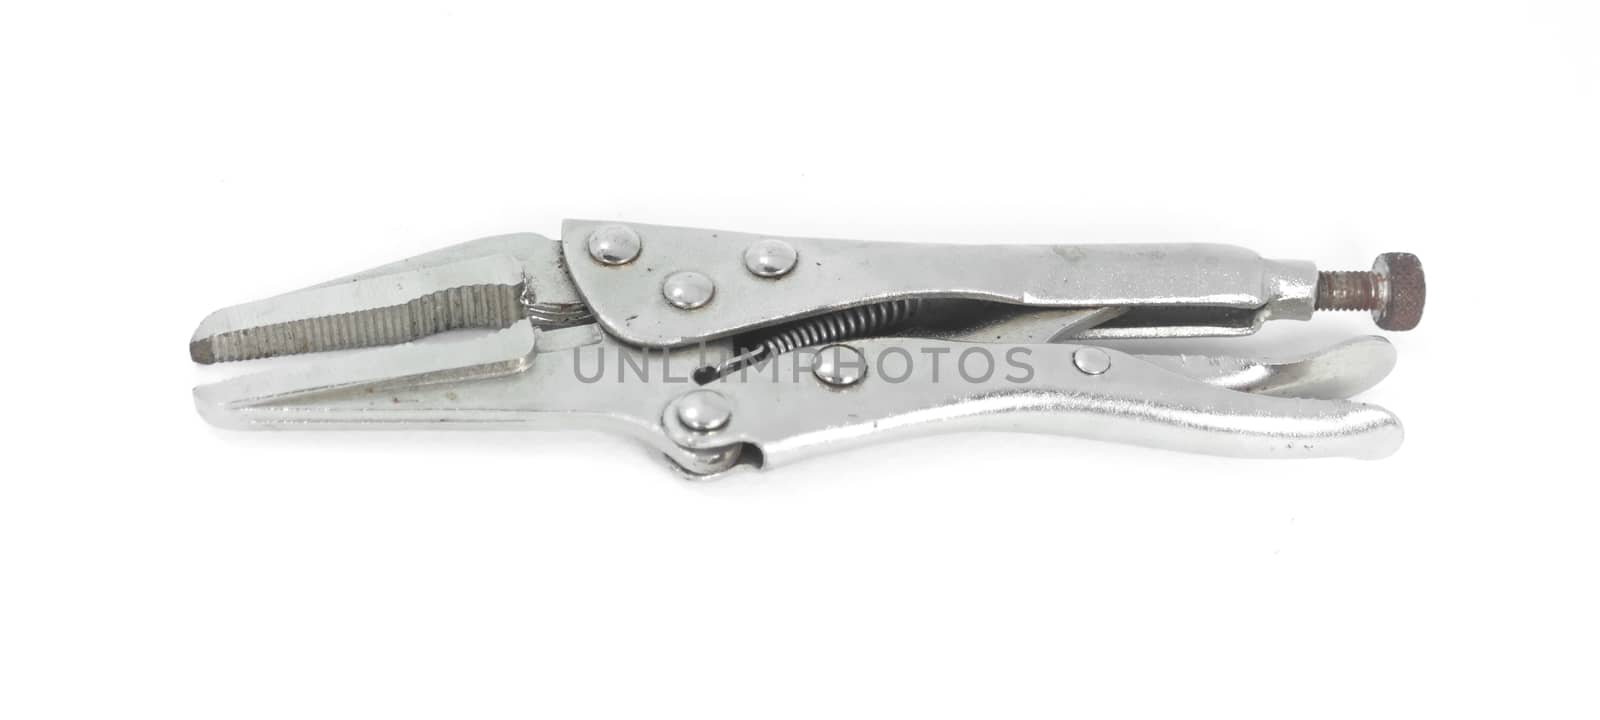 Metal locking pliers isolated on white background